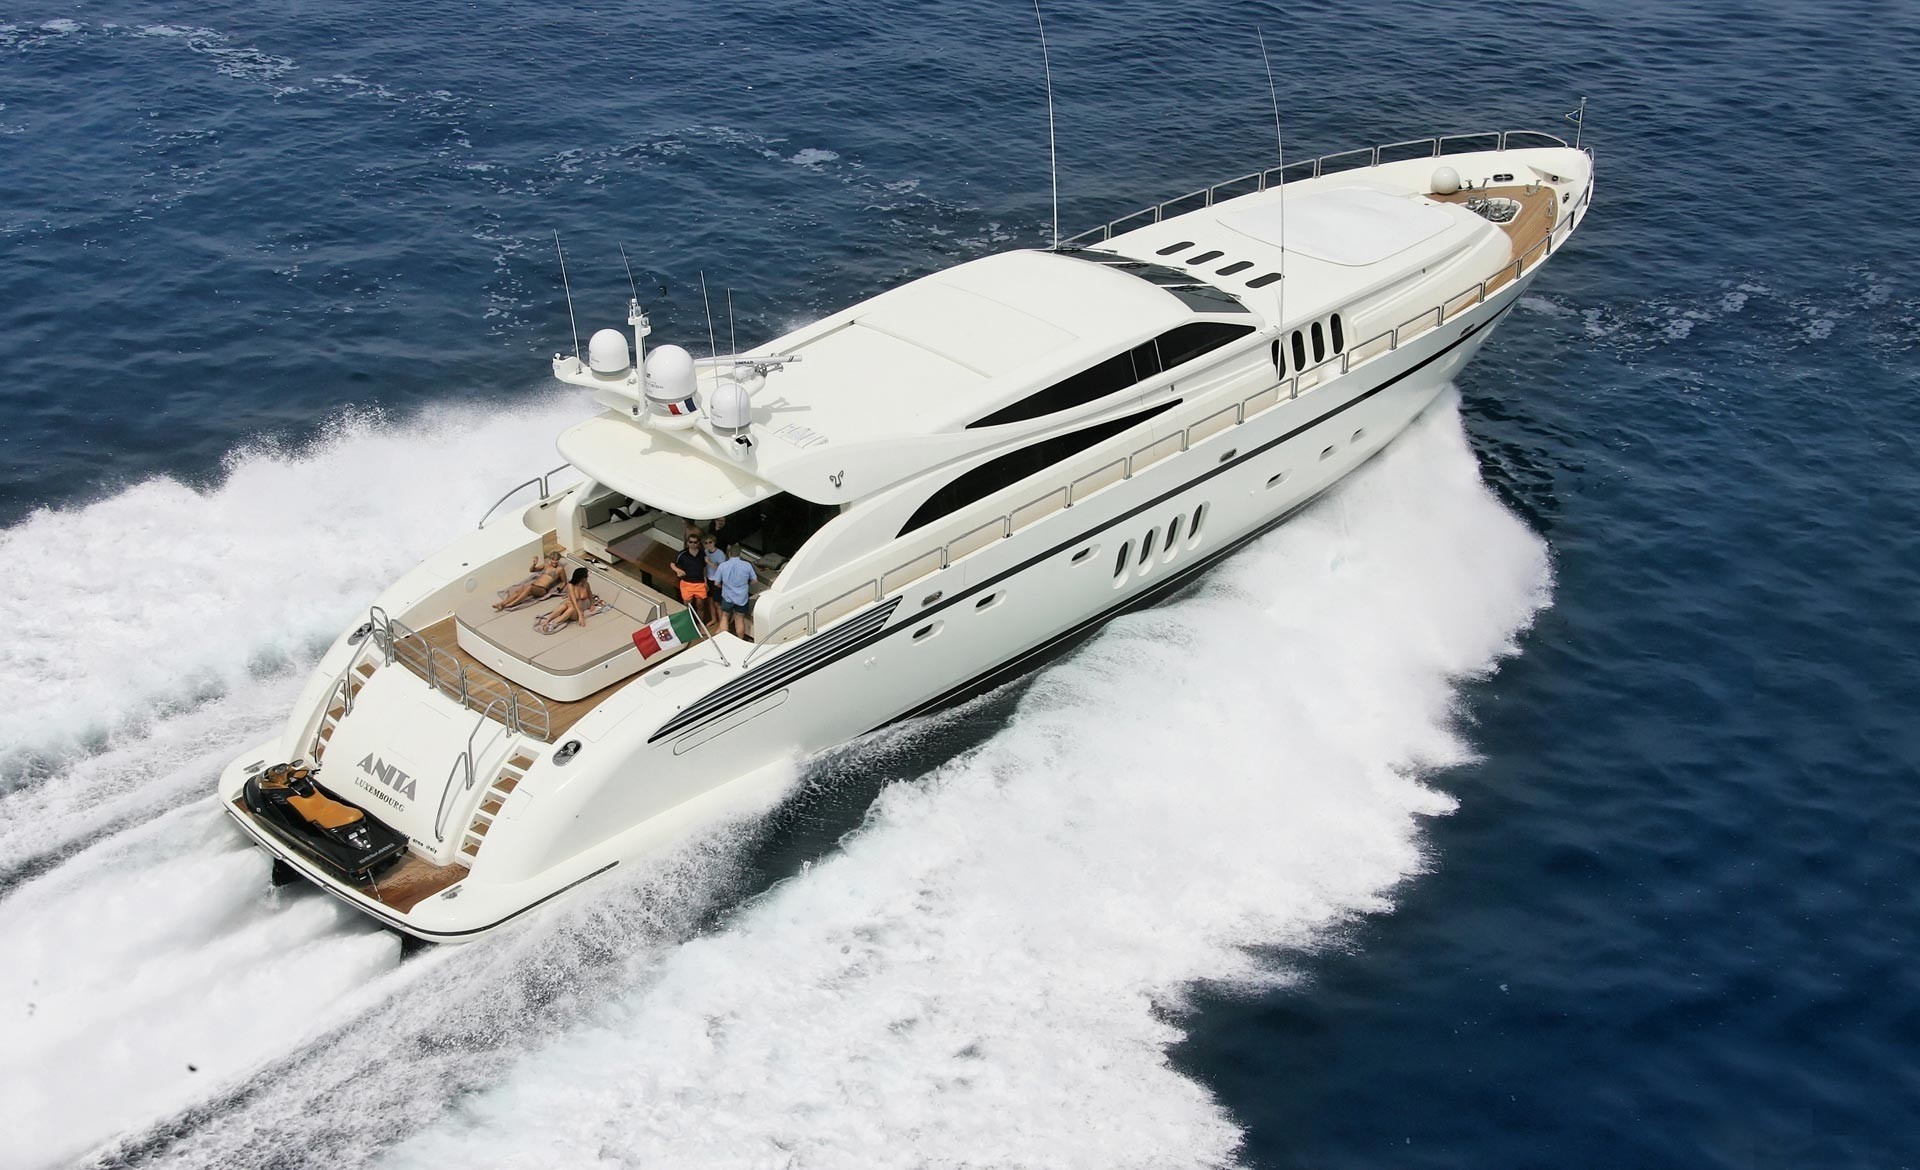 leopard yachts price